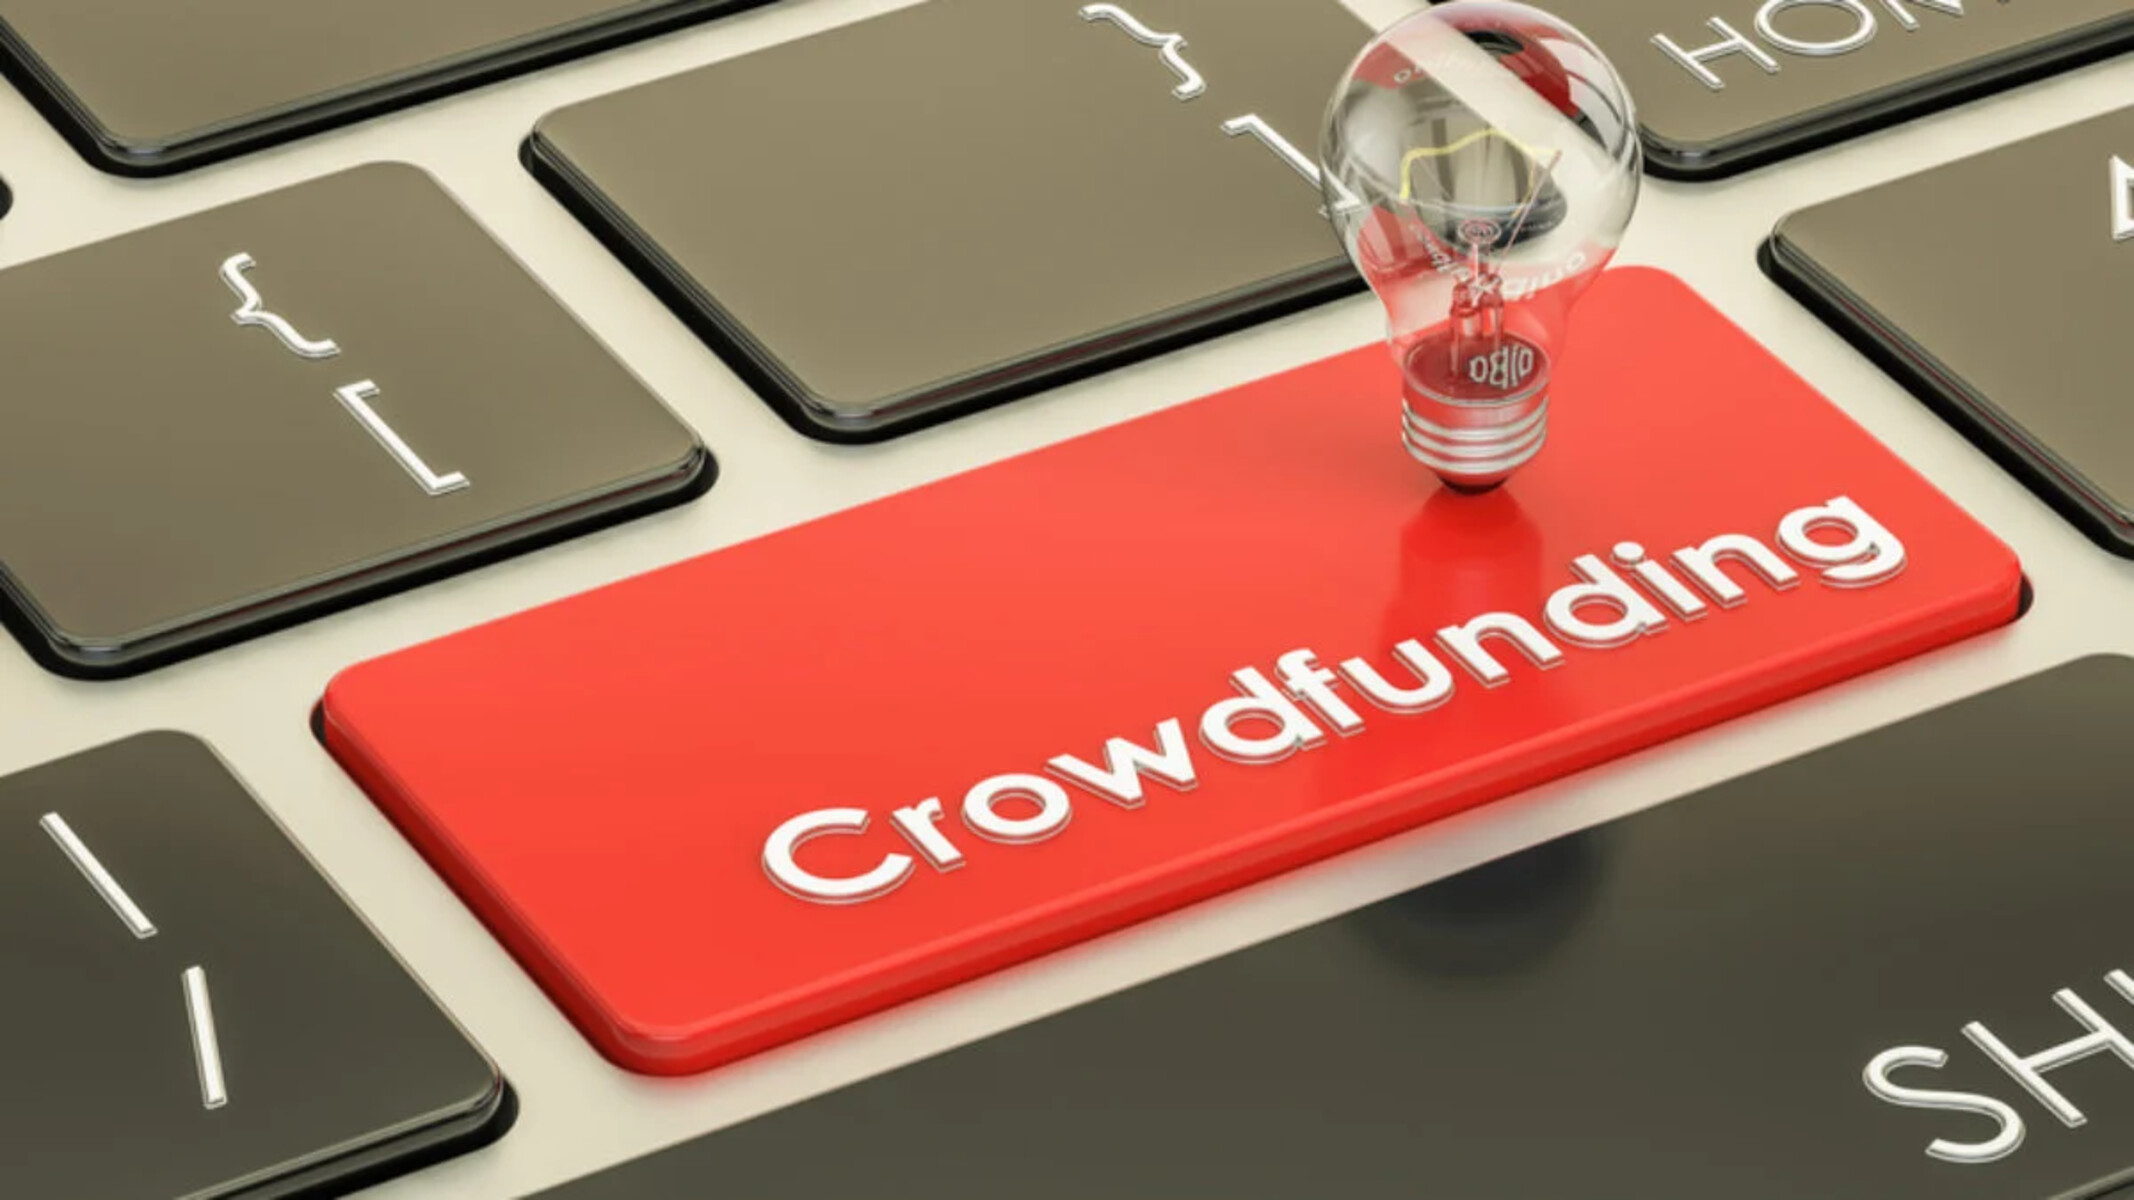 How To Prevent Getting Scammed From Crowdfunding